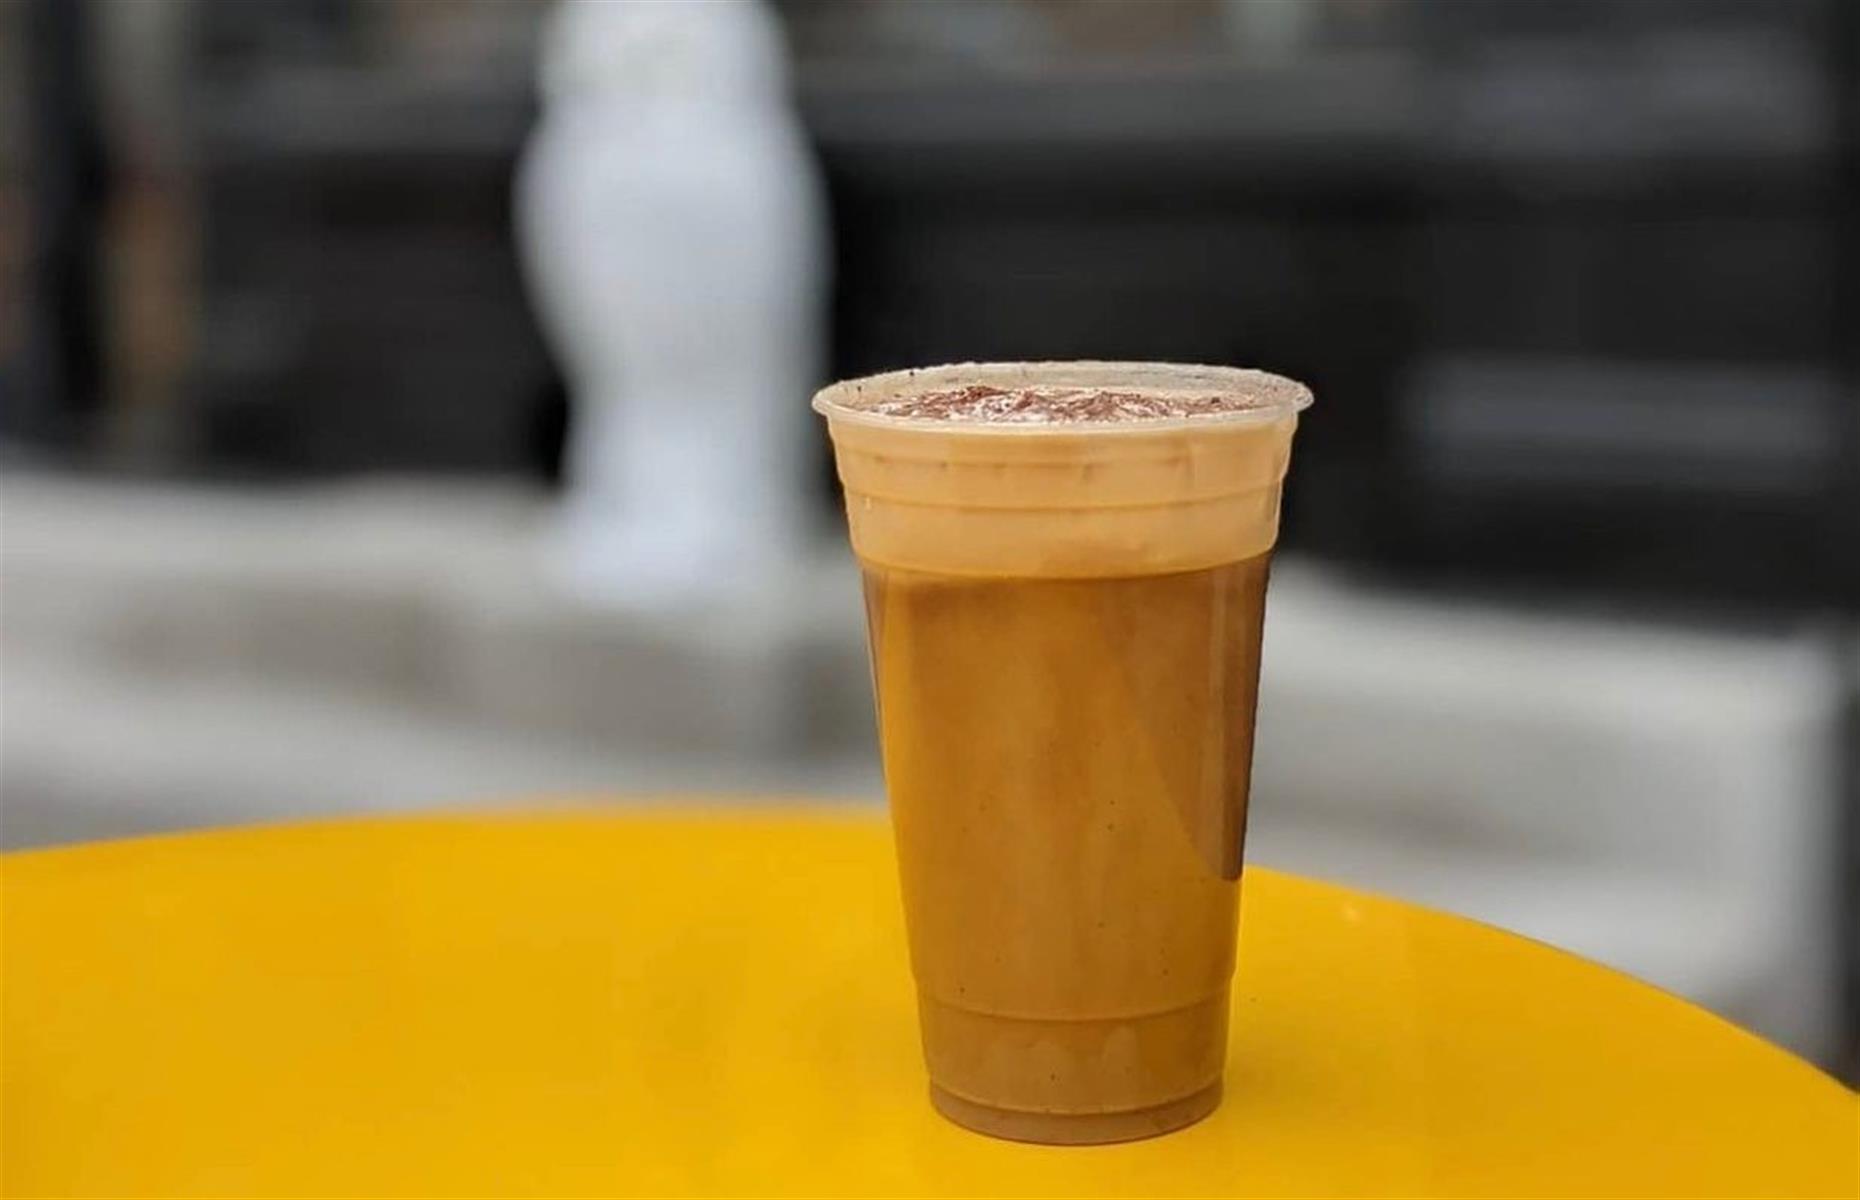 <p>A twist on the wizarding world’s favorite drink, the ButterBrew is a butterscotch-flavored, sweet cream-topped beverage created by the roasters at <a href="https://www.badowlcoffee.com/s/instagram">Bad Owl Coffee</a>. It’s also caffeine and alcohol free, meaning that Harry Potter fans of all ages can enjoy it.</p>